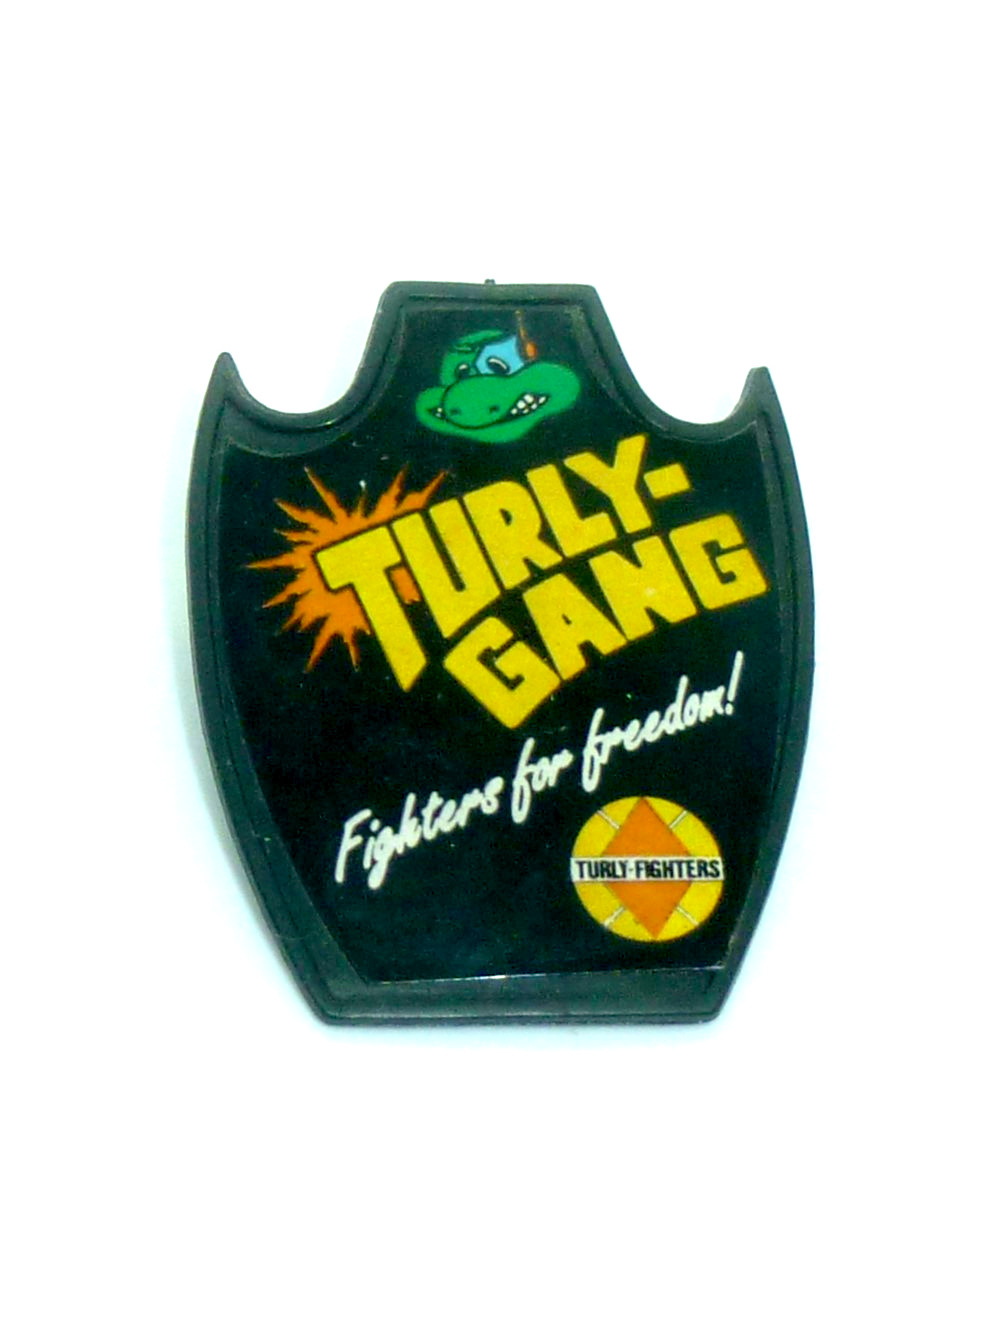 Turly-Gang shield - Fighters for freedom - Accessory